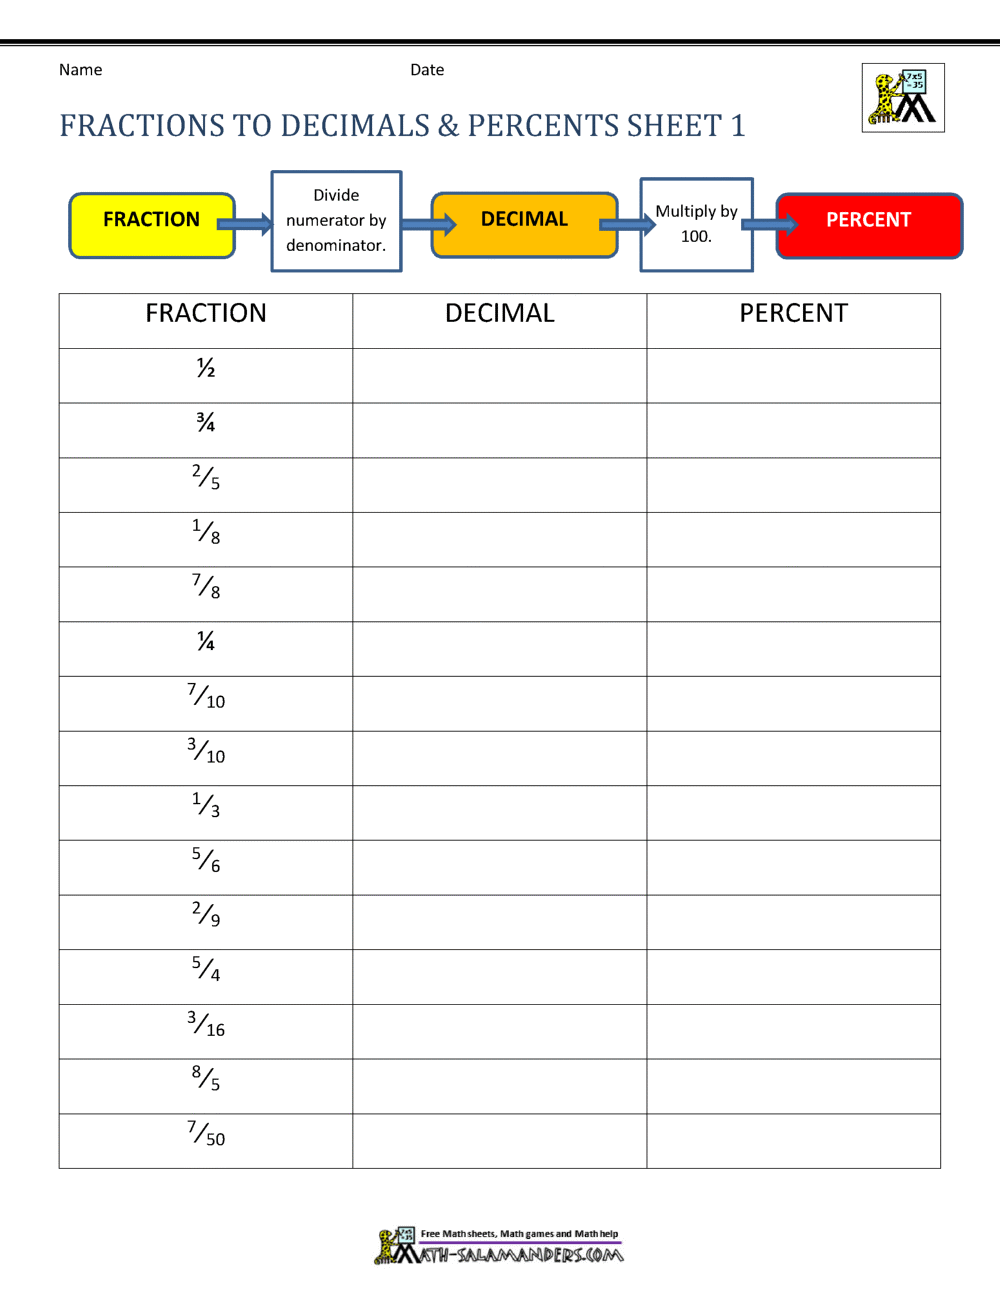 Fractions Decimals Percents Worksheets Within Fraction Decimal Percent Worksheet Pdf